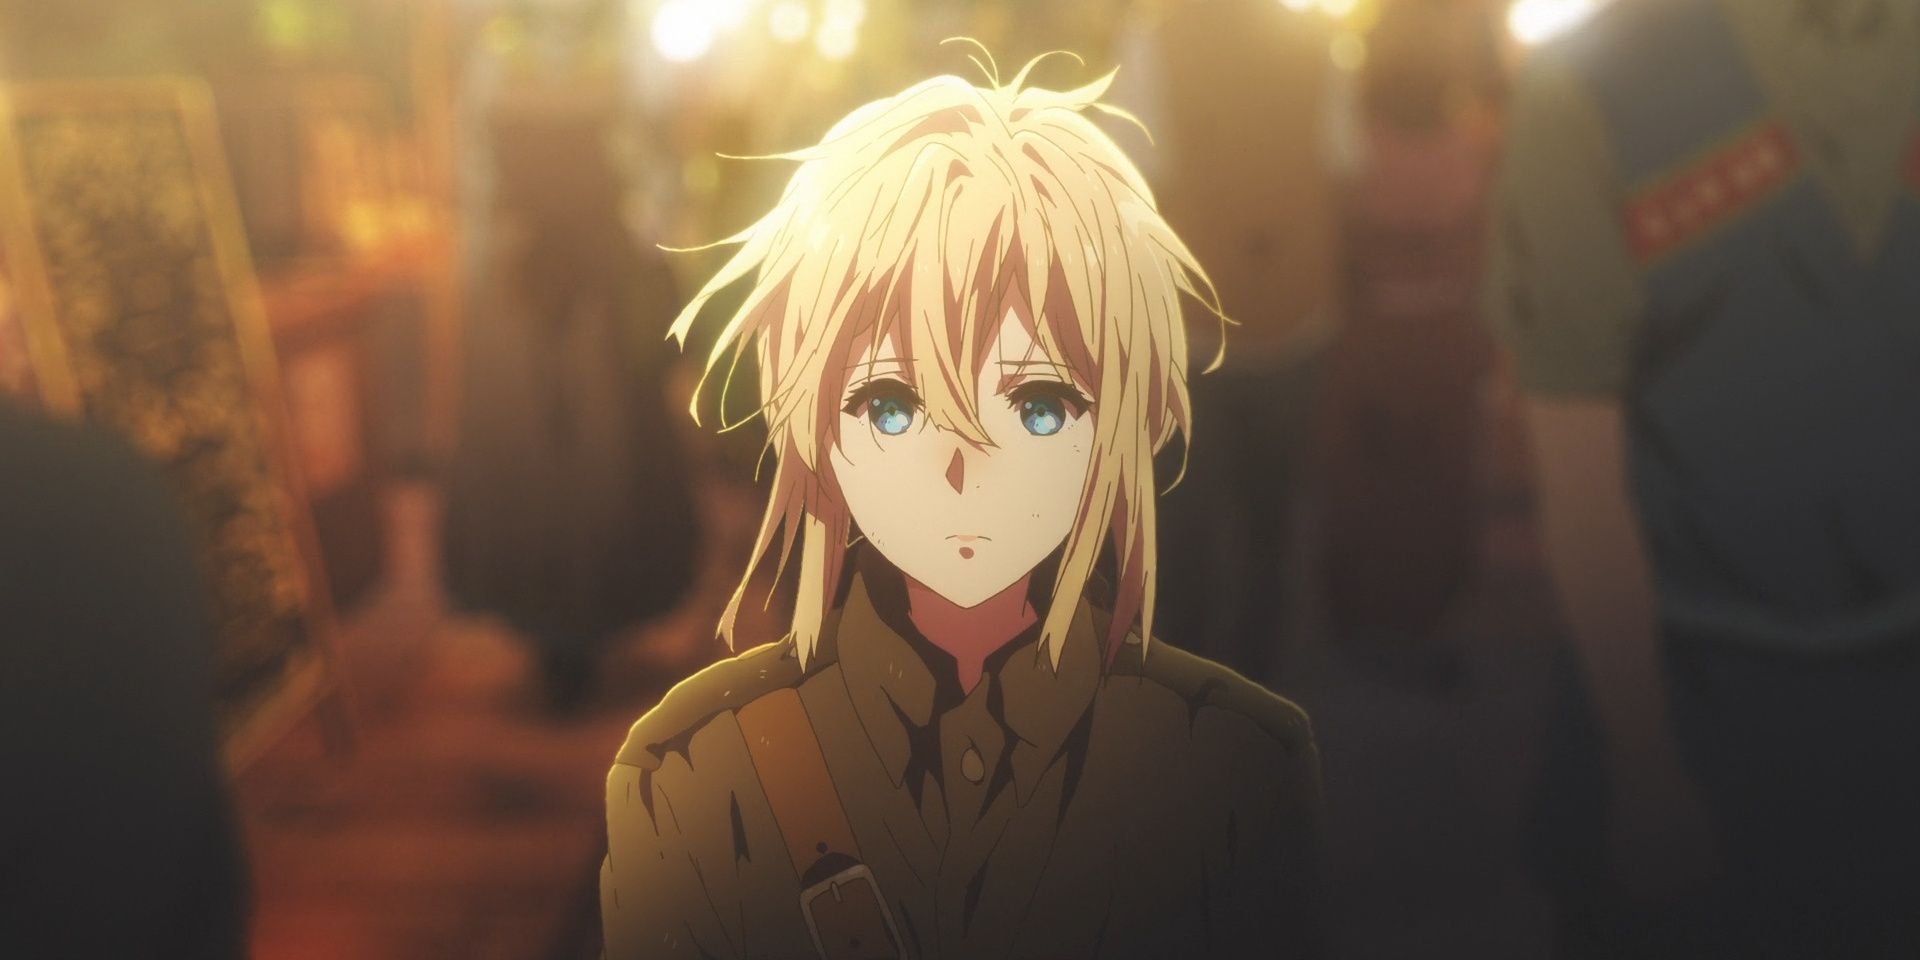 Violet Evergarden Gilberts Fate in the Series & Movie Explained